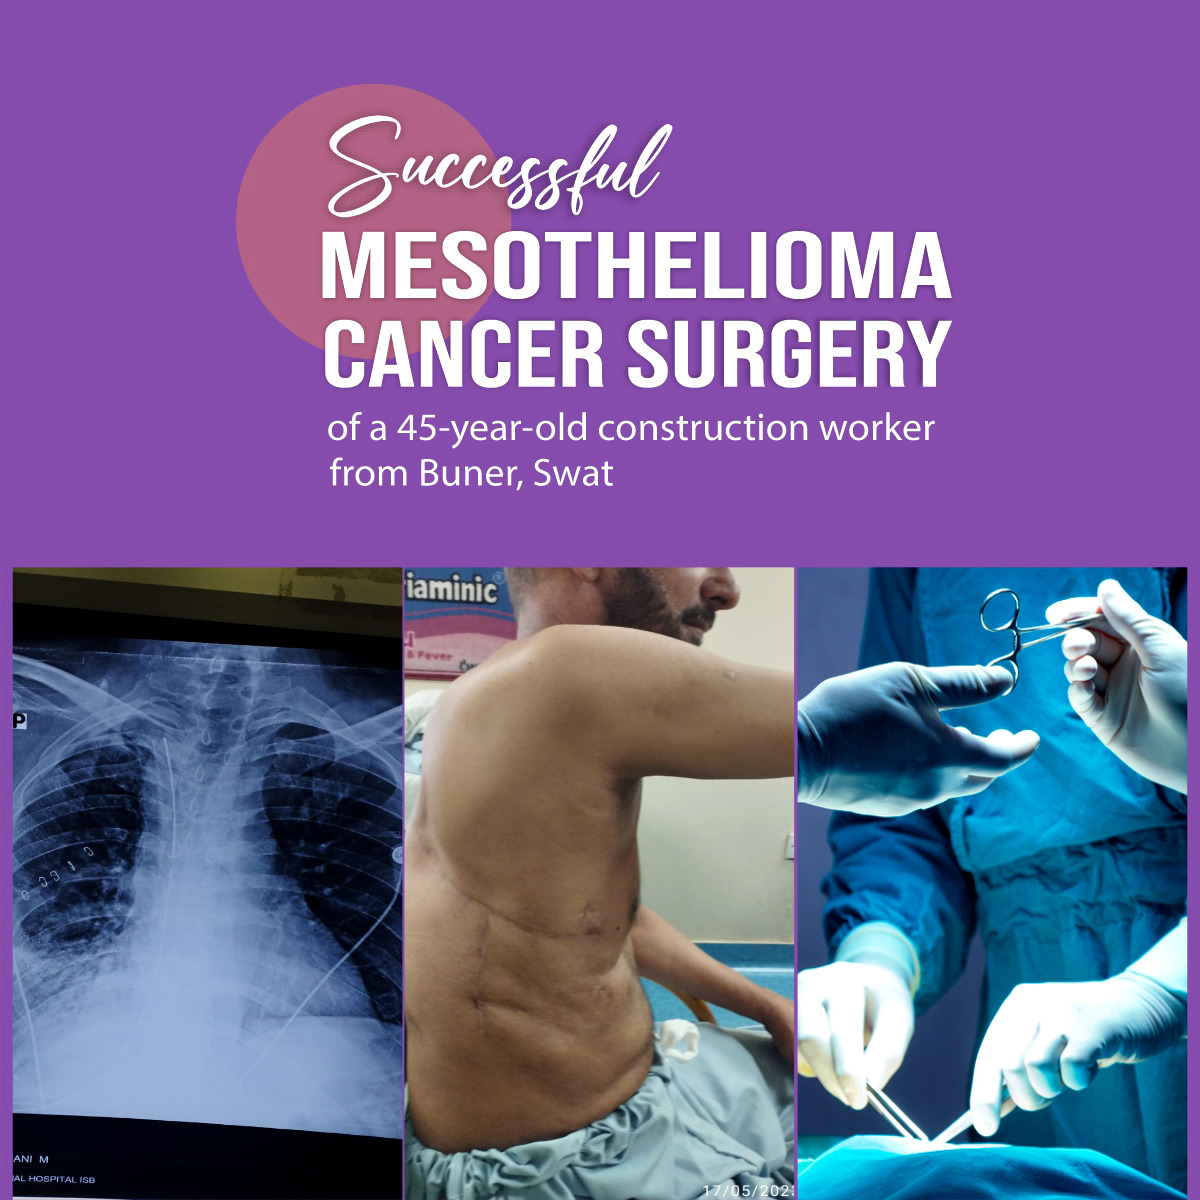 Successful Mesothelioma Cancer Surgery